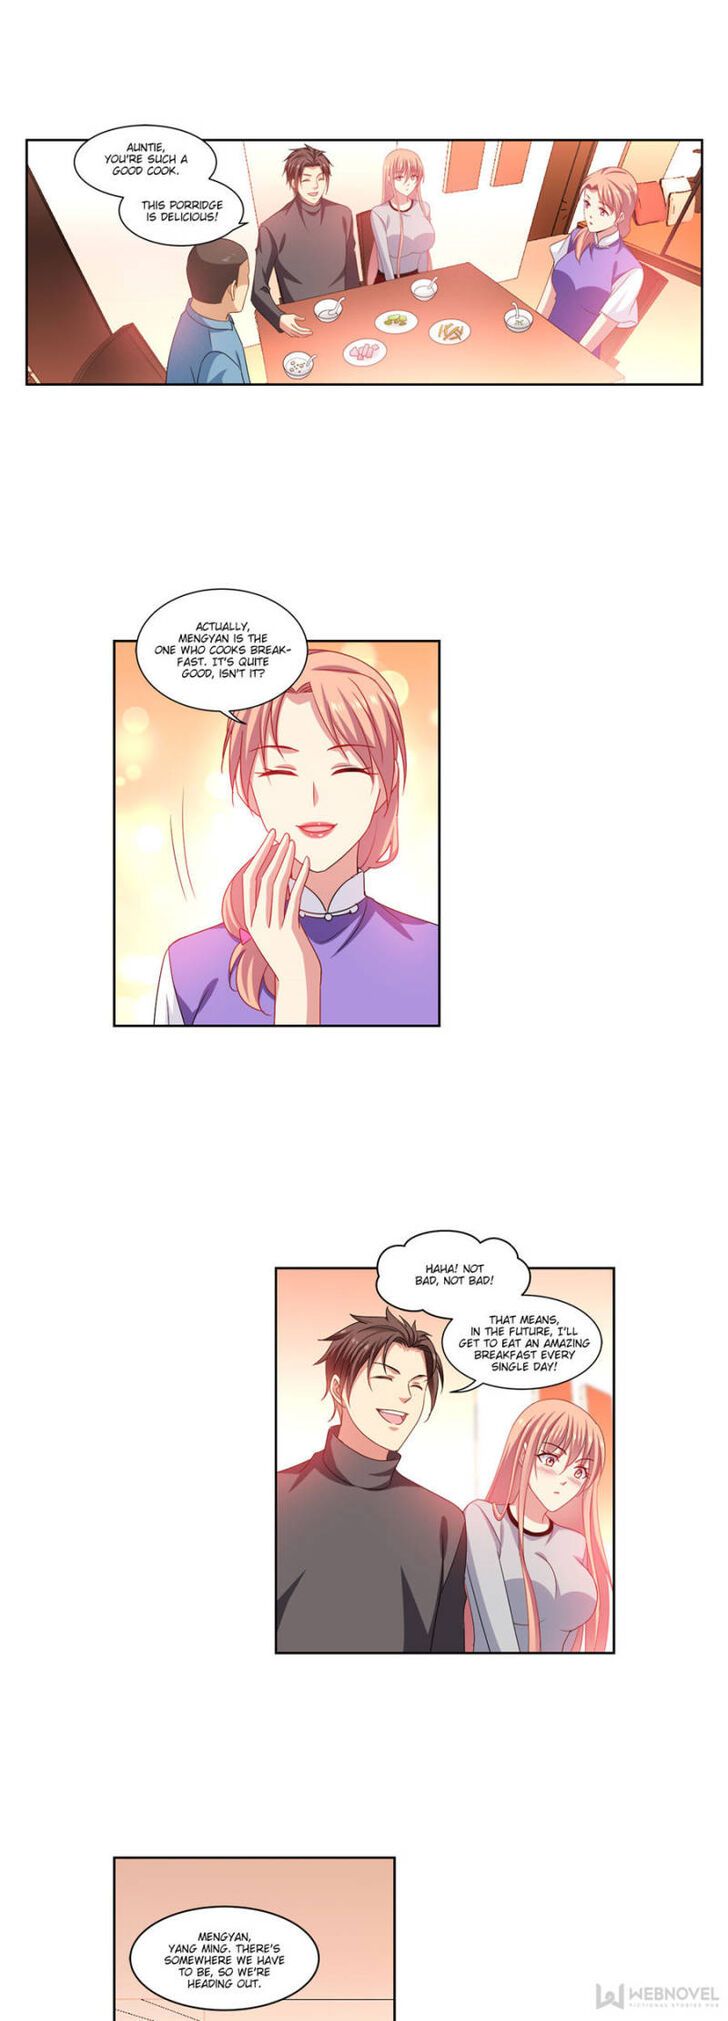 So Pure, So Flirtatious ( Very Pure ) Chapter 268 page 10